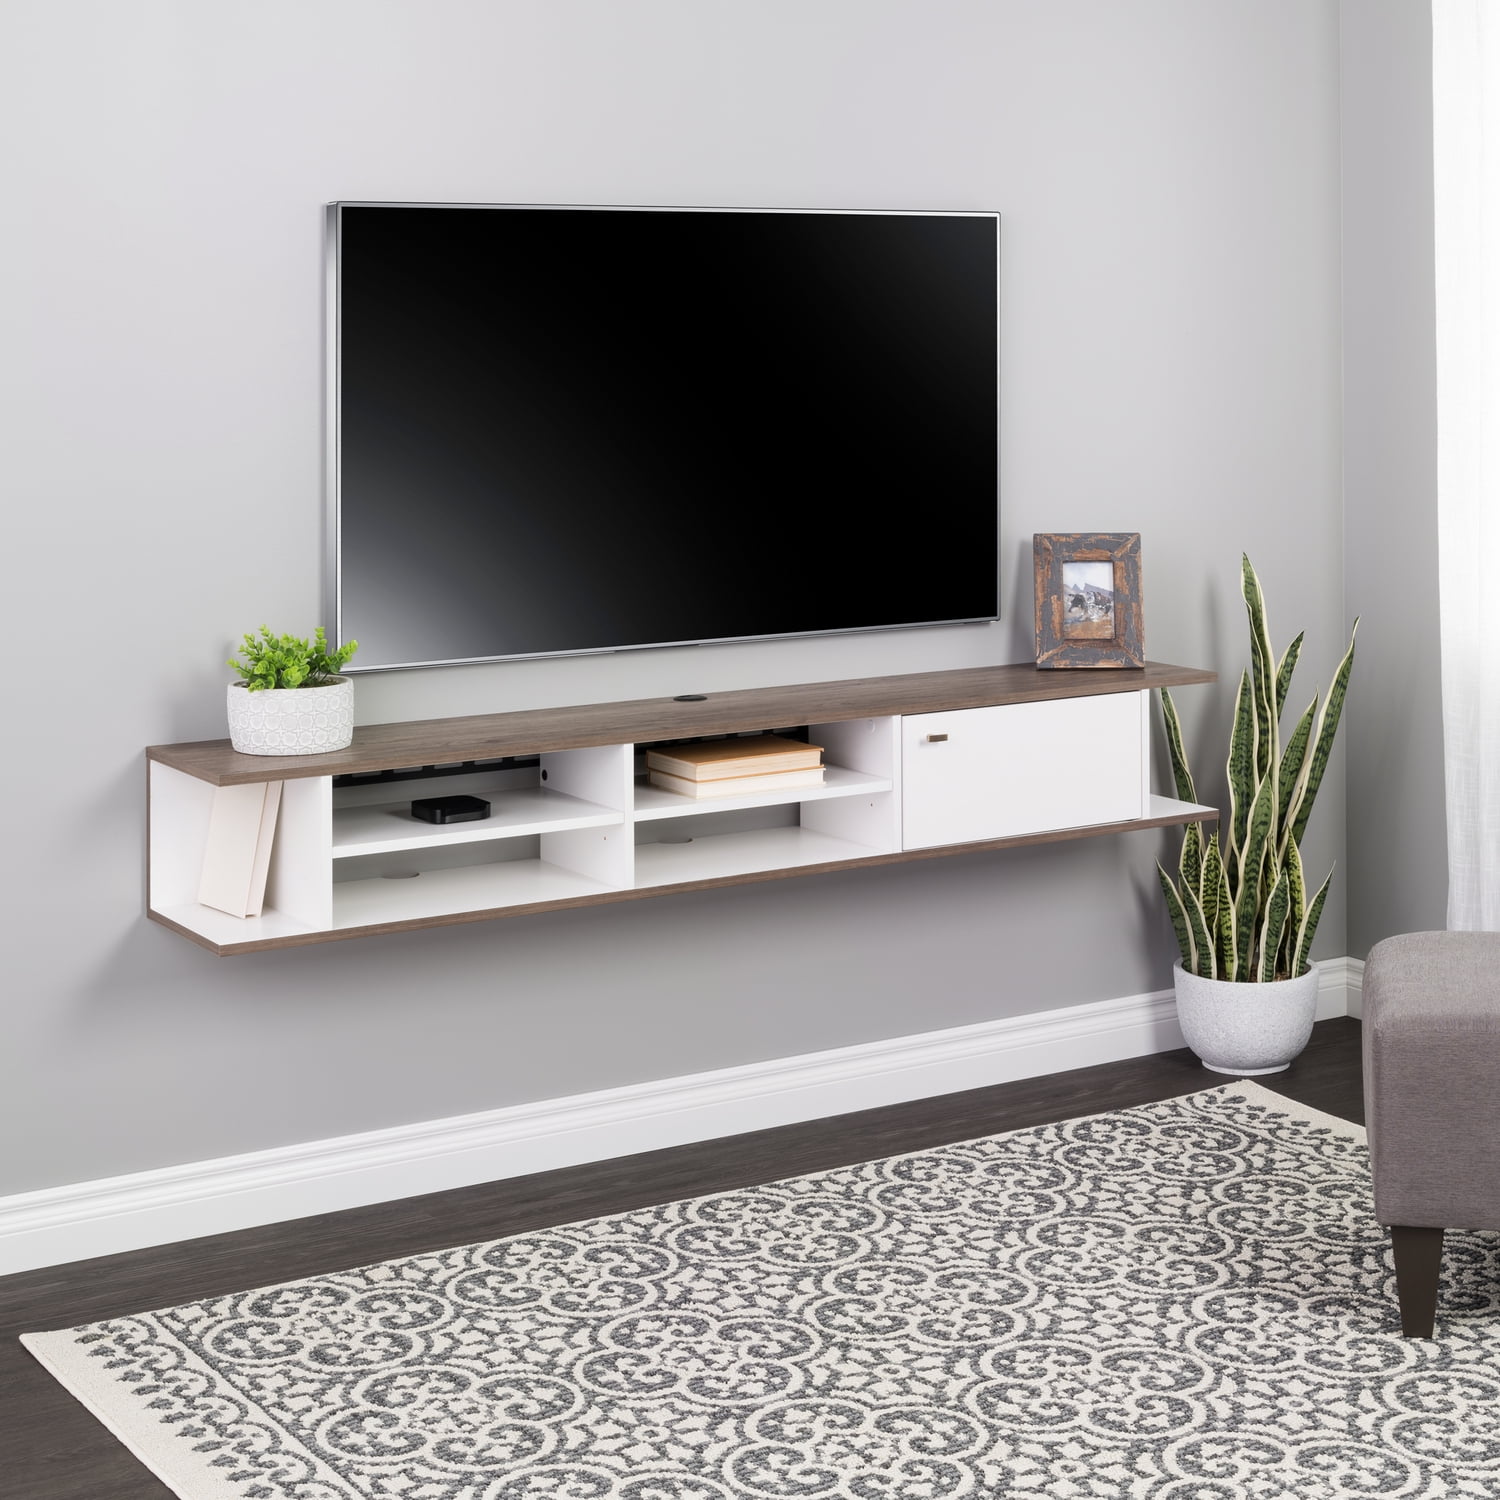 Details about   Entertainment Center Tv Media Stand Flat Panel Holder Console Table 3 Cube Shelf 